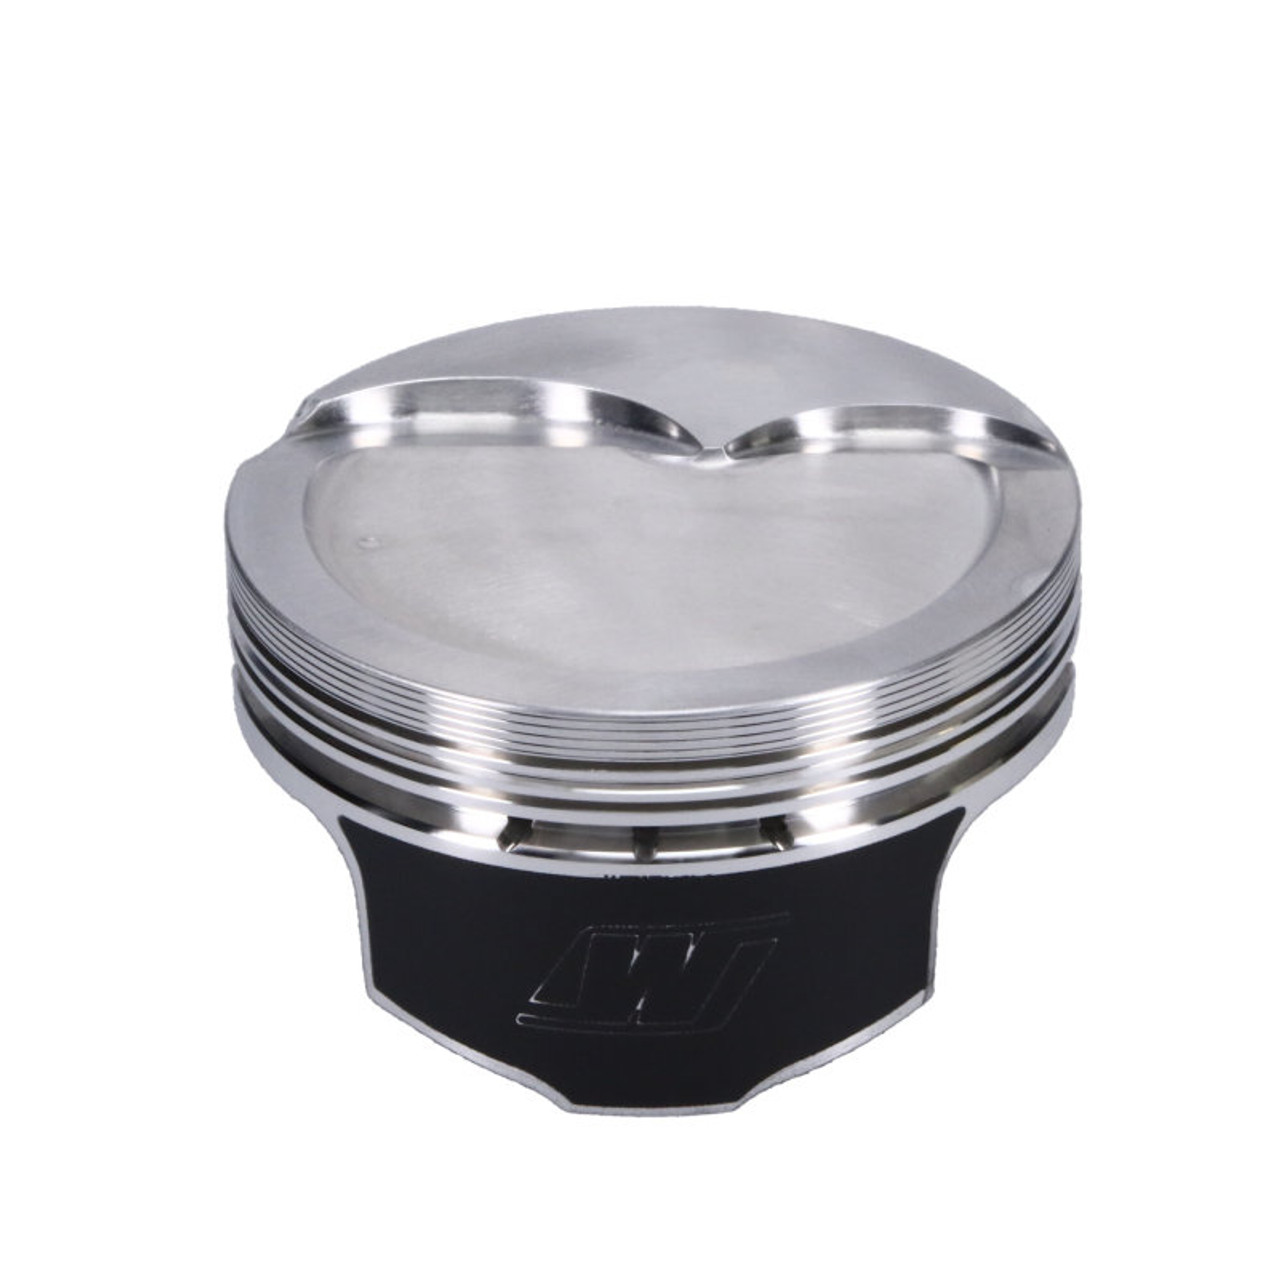 Wiseco Chevy LS Piston Shelf Stock Kit 4.130in Bore 1.110in CH -20.00 CC - Set of 8 - K452X130 User 2